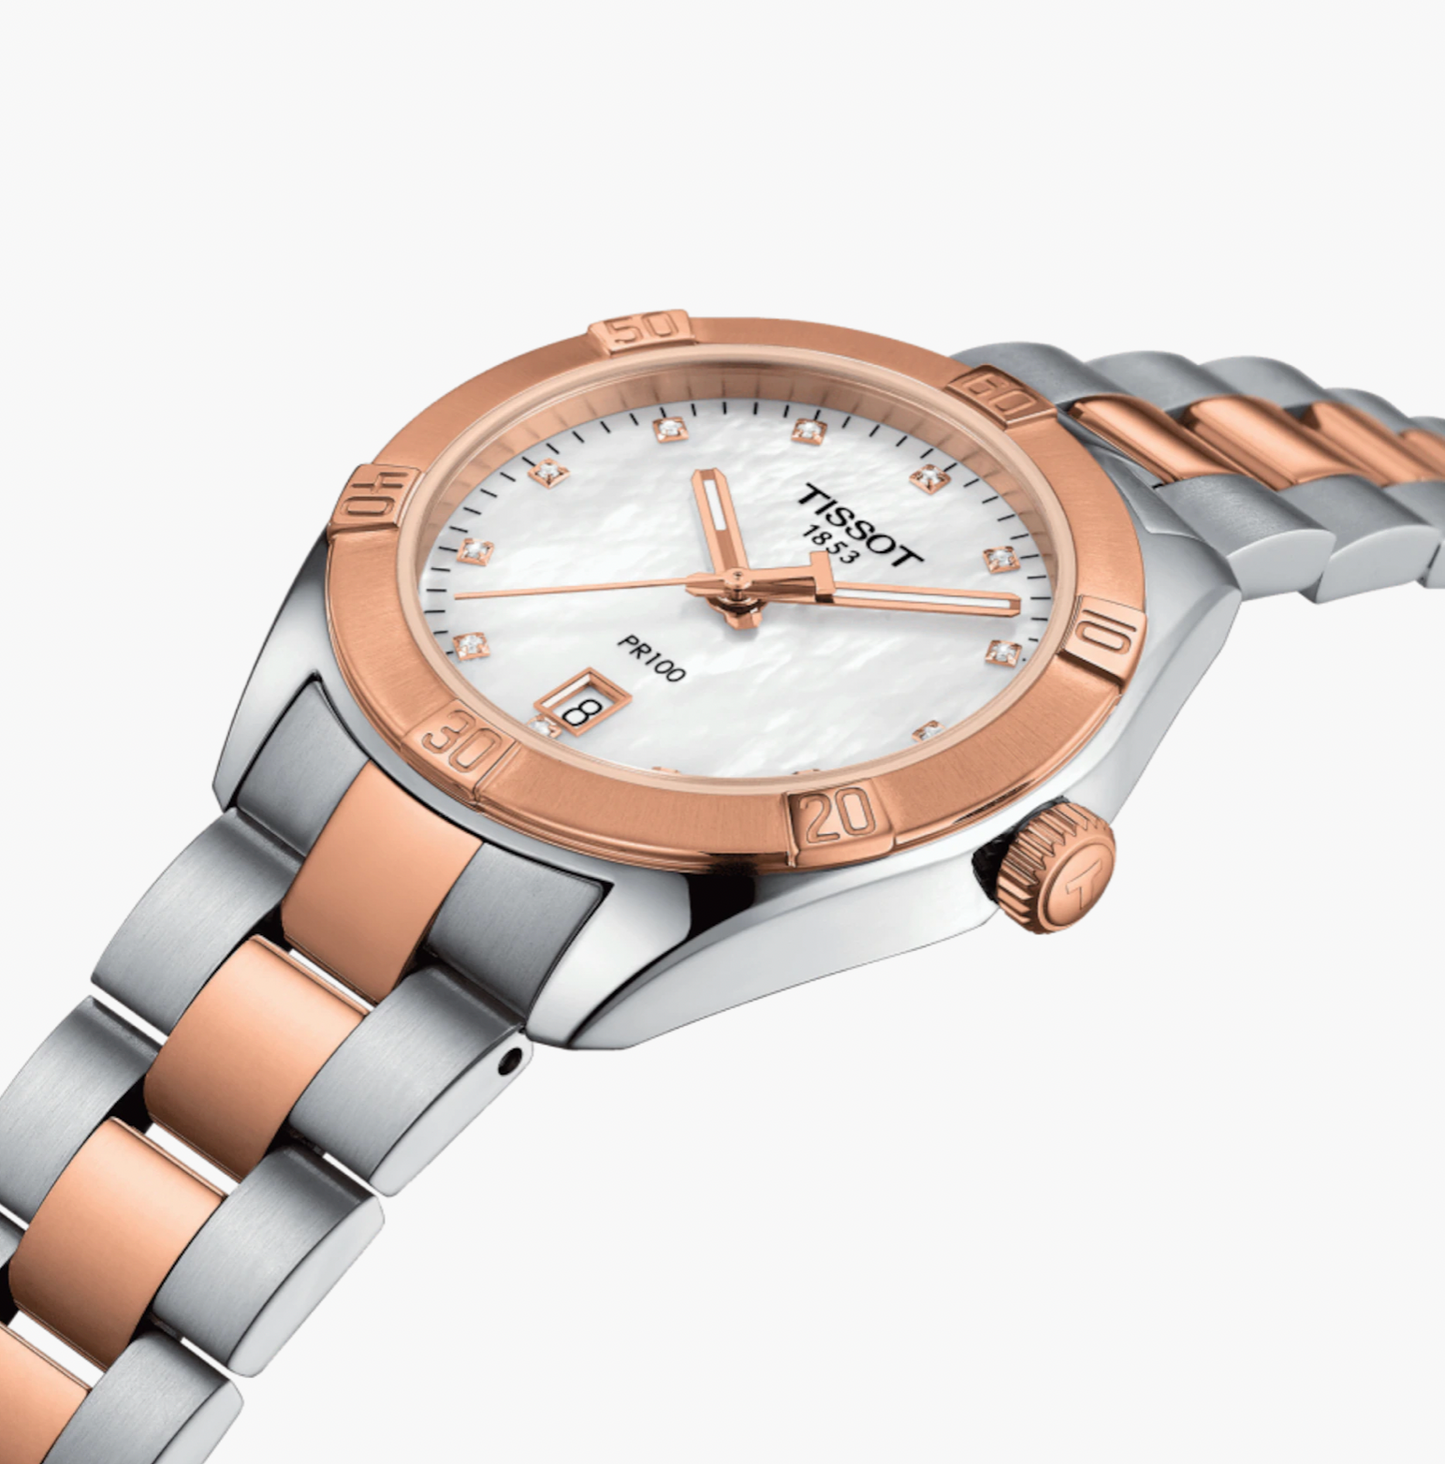 PR 100 Sport Chic Silver-Rose Gold Mother of Pearl | Tissot | Luby 